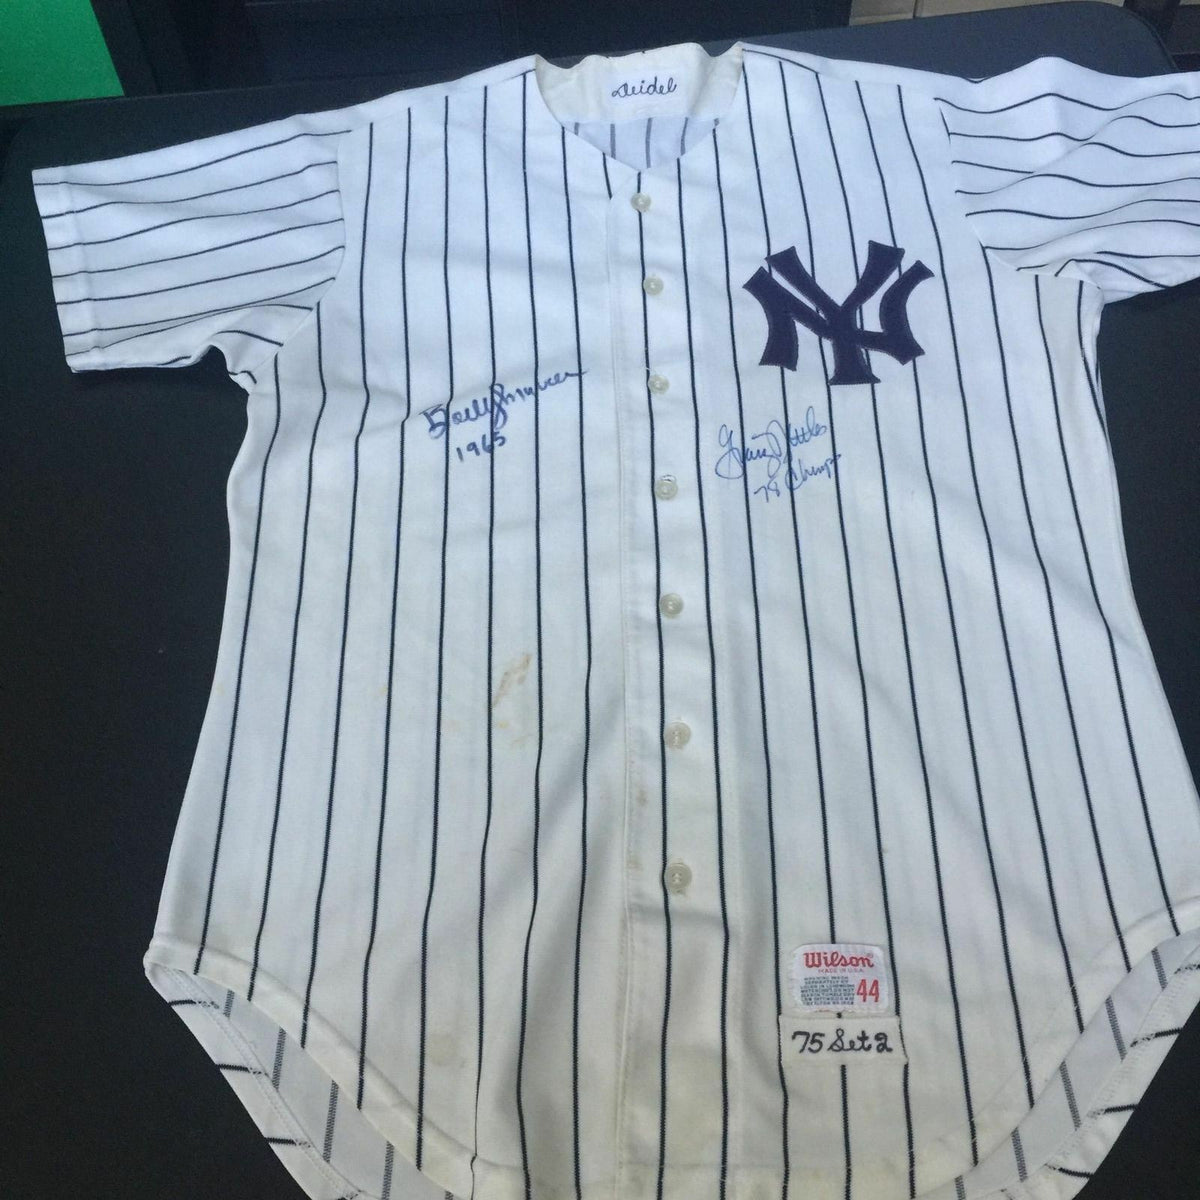 1974 Bobby Murcer Game Worn New York Yankees Jersey from The Bobby